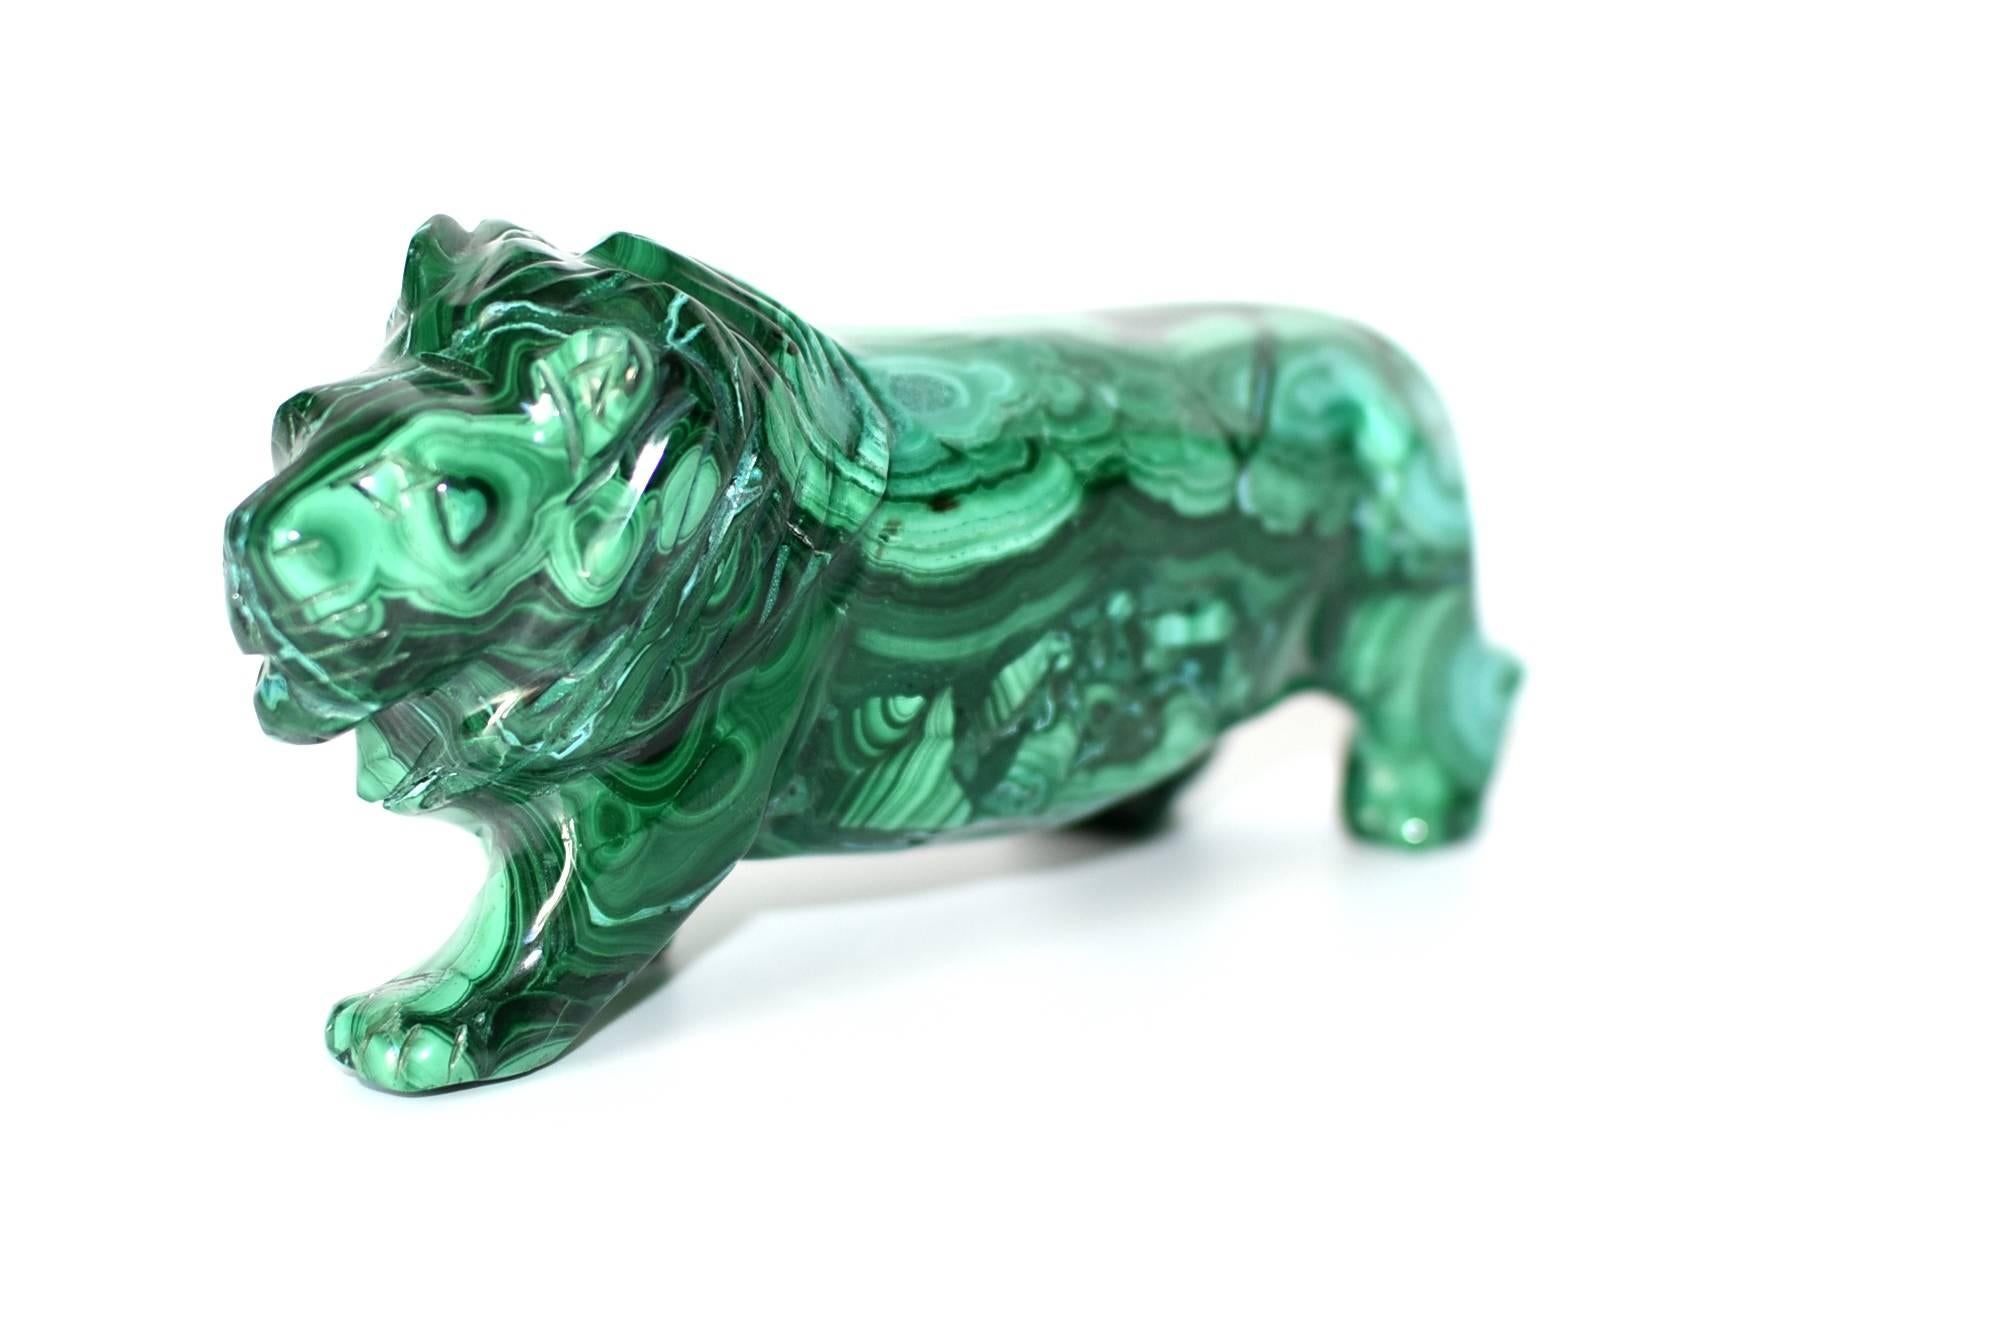 Hand-Crafted Natural Malachite Lion Sculpture, 1.4 Lb